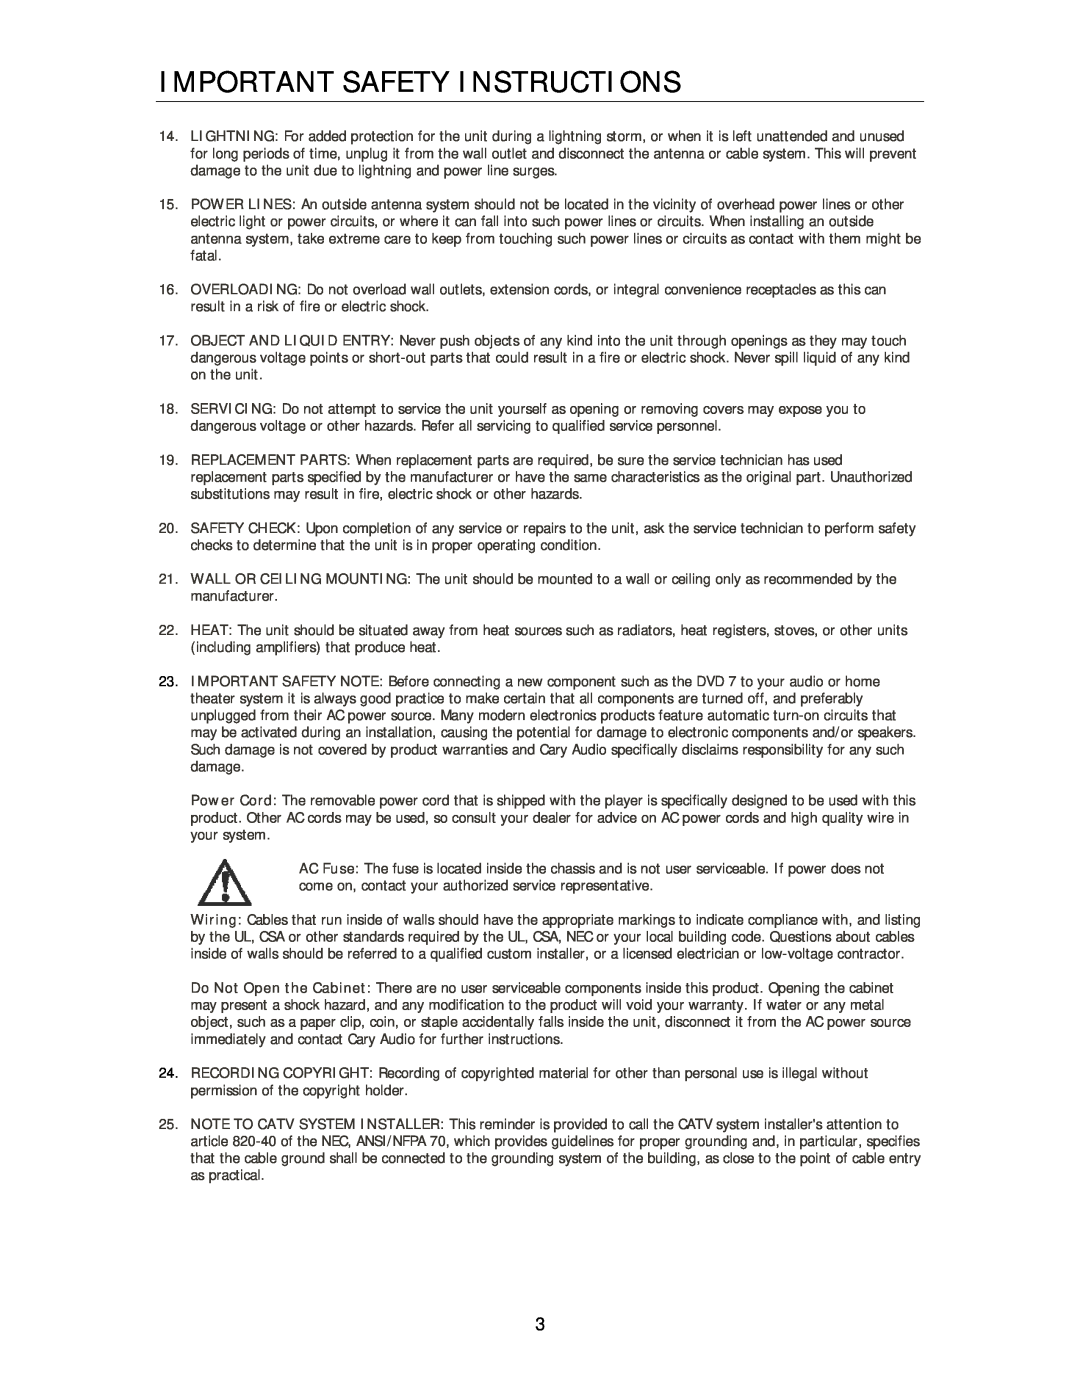 Cary Audio Design Cinema 11 owner manual Important Safety Instructions 